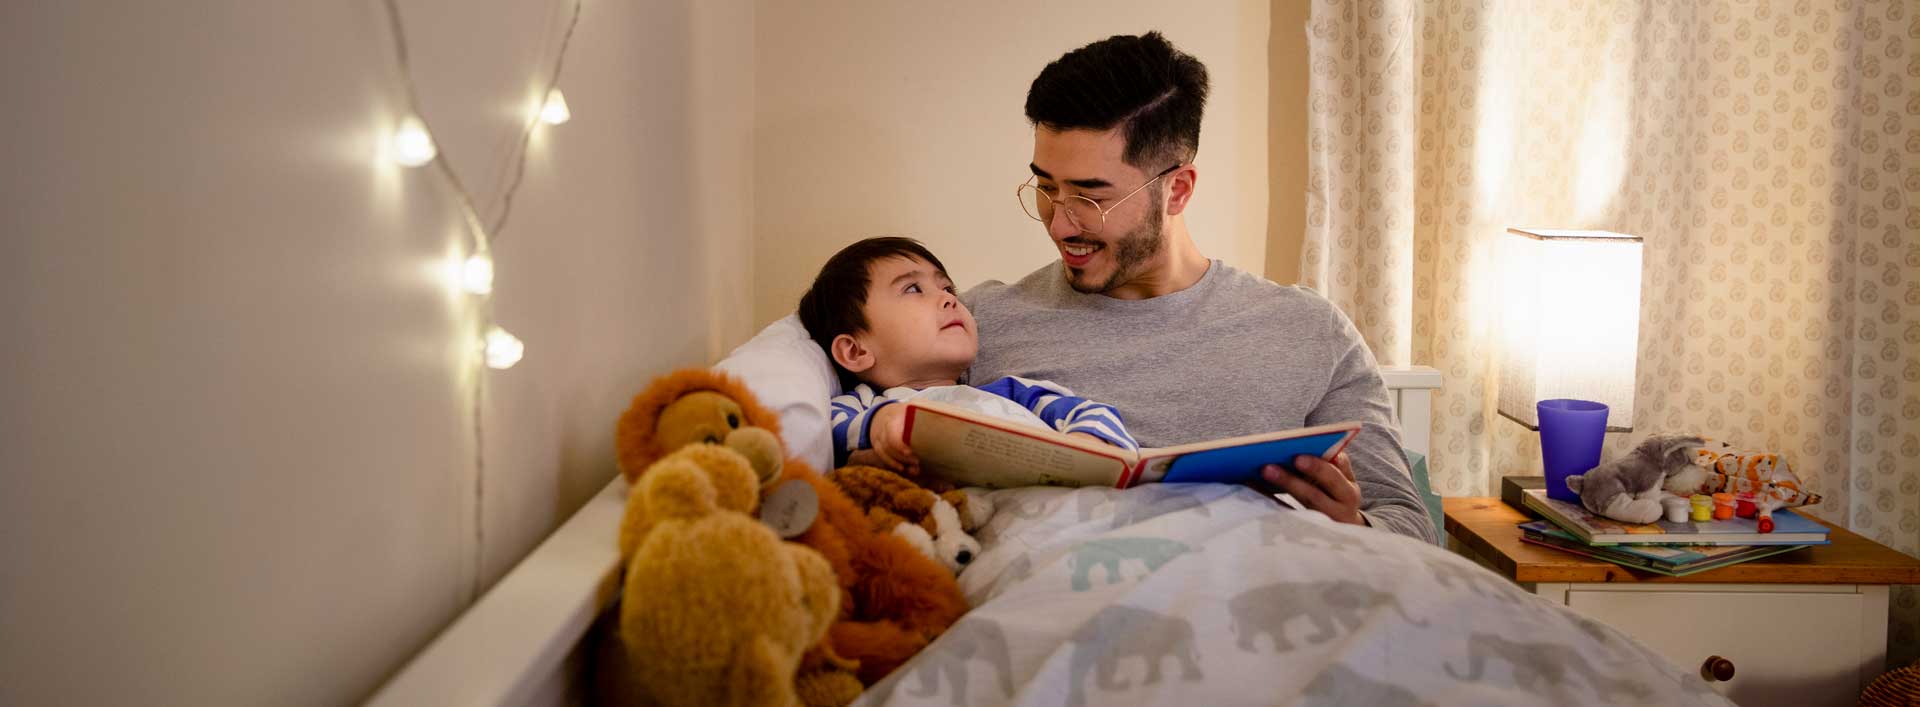 A small child and his father in the child's bed reading a book together